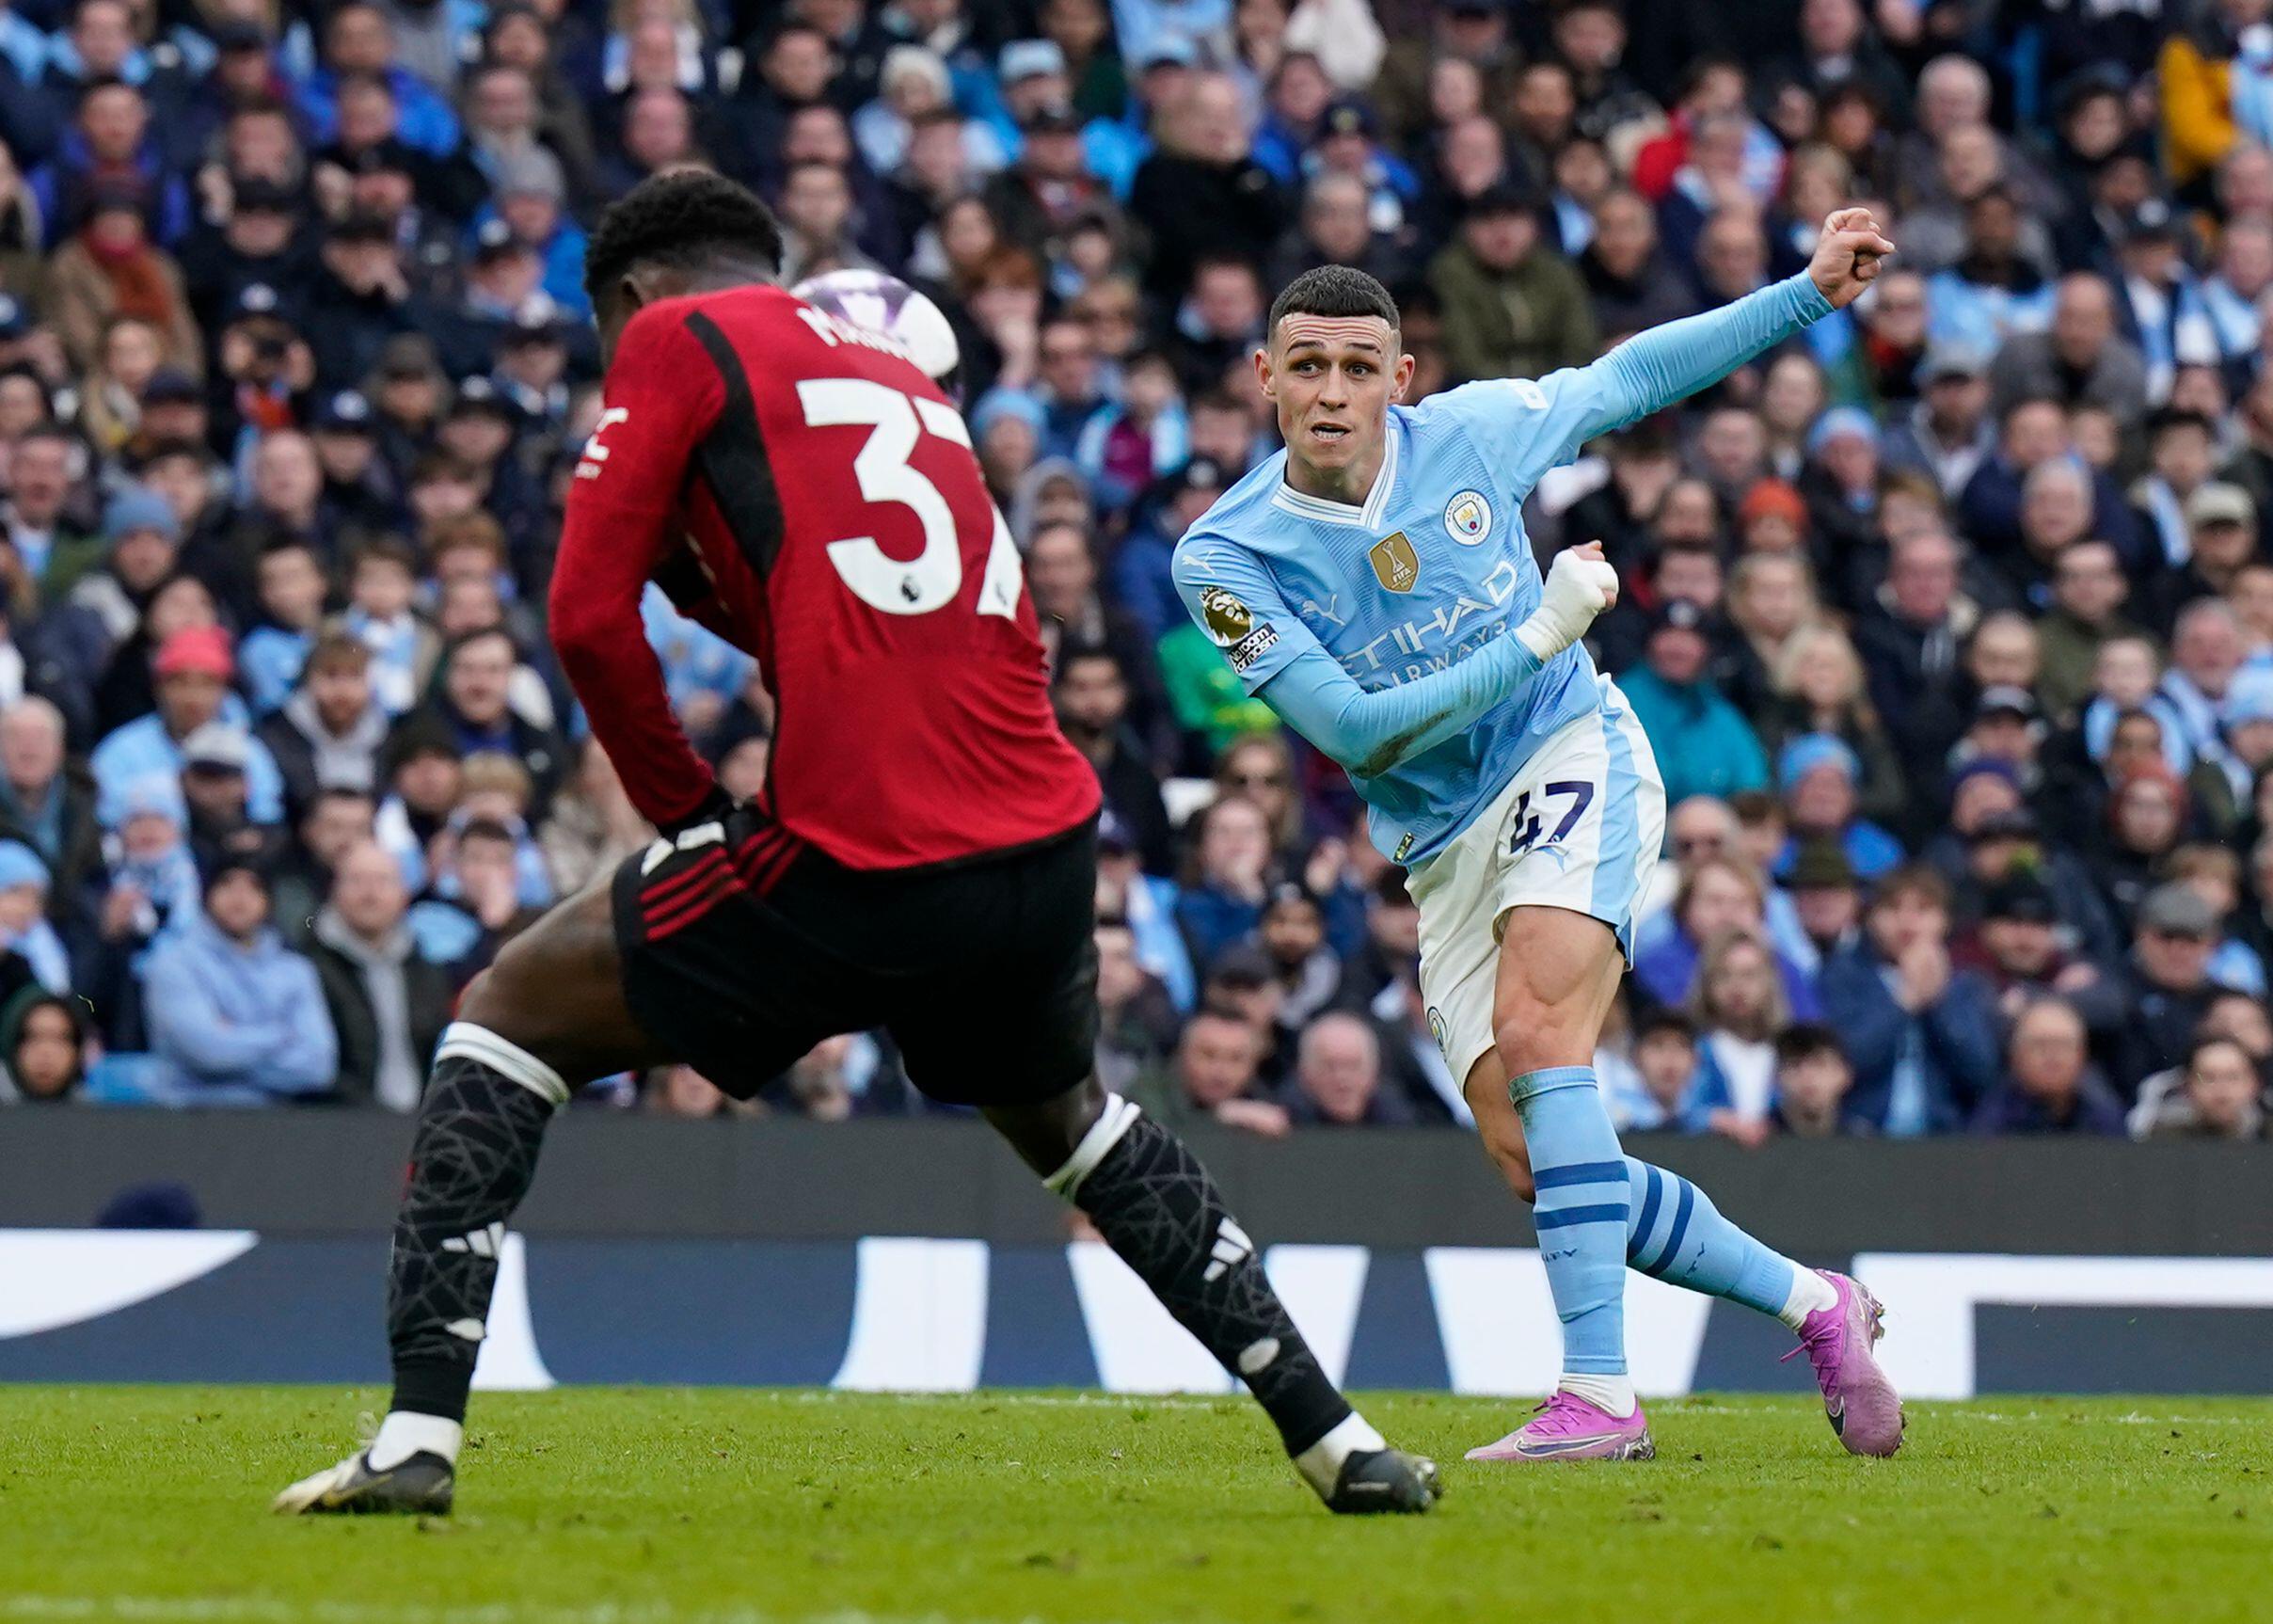 Squawka Live on X: "Phil Foden has now been directly involved in 5+ goals  against two 'Big Six' sides in the Premier League: ⚽⚽⚽🅰️🅰️ vs. Liverpool  ⚽⚽⚽⚽⚽ vs. Man Utd Anything Rashford